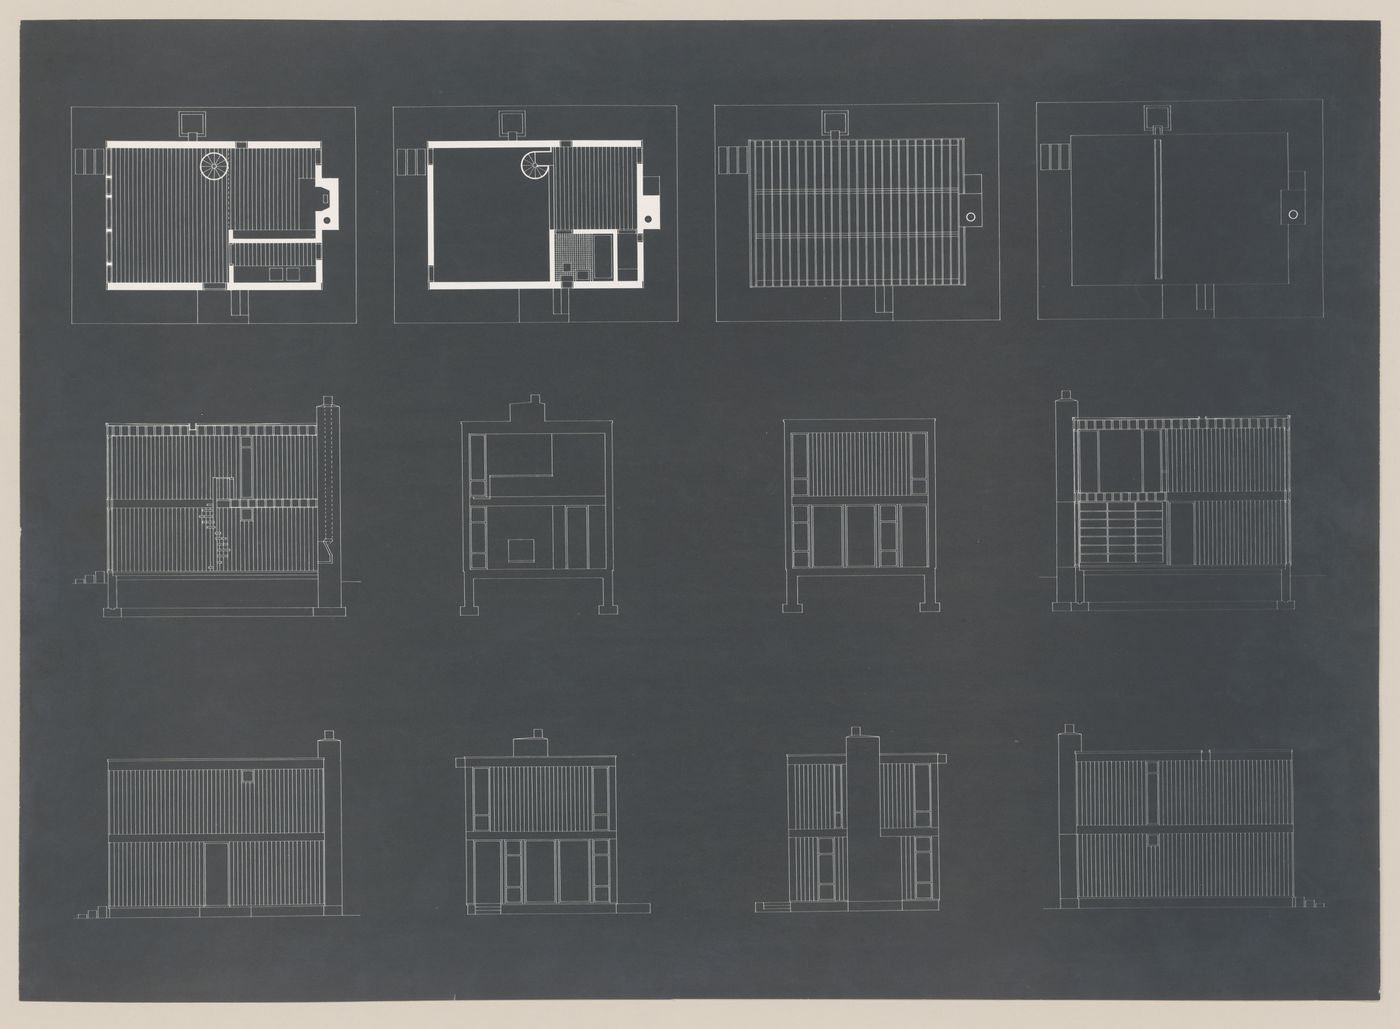 Plans and elevations for Freidlander House